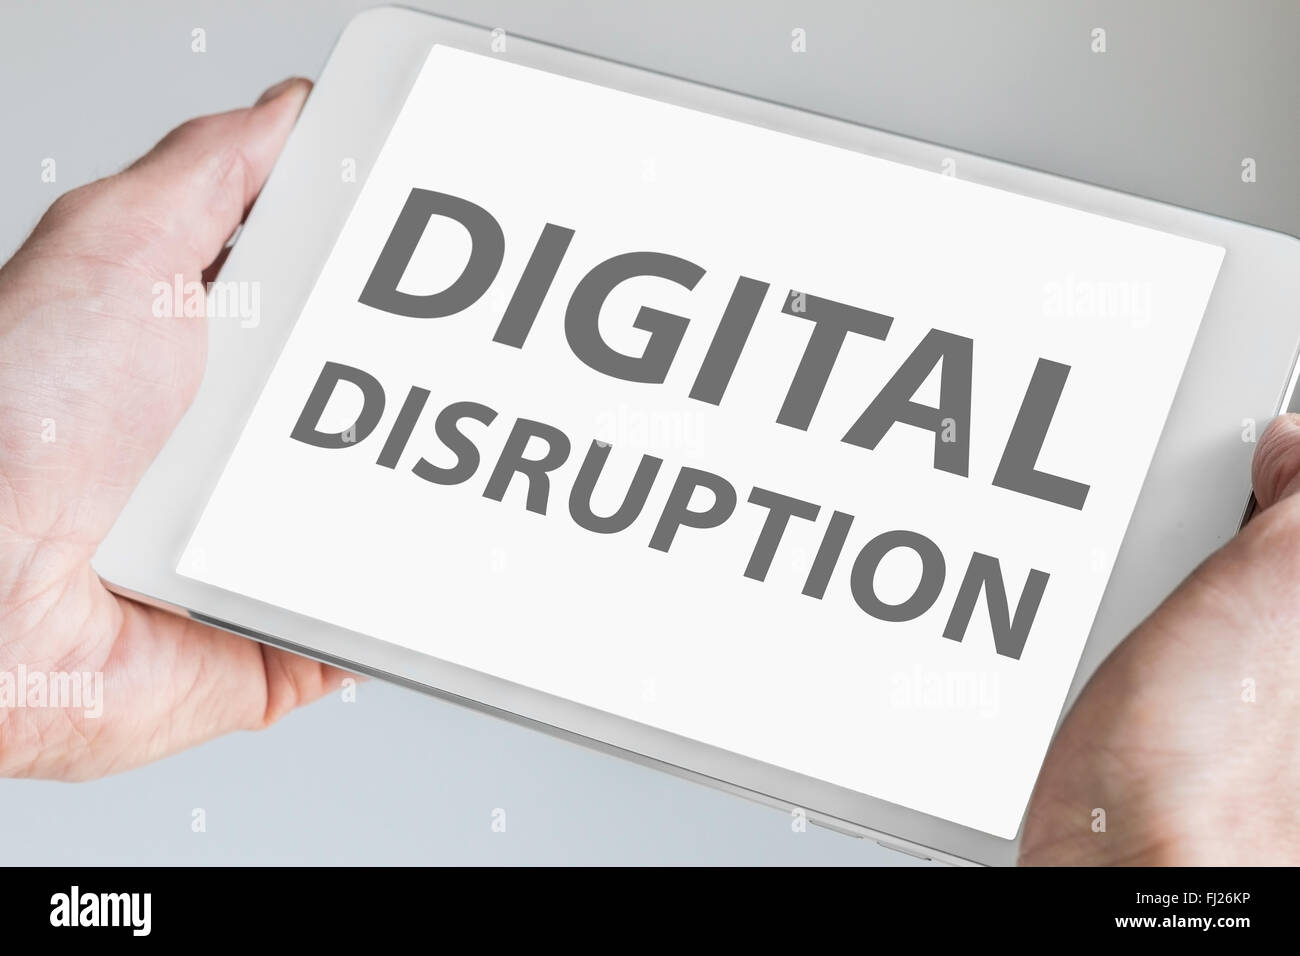 Digital disruption text displayed on touchscreen of modern tablet or smart device. Stock Photo